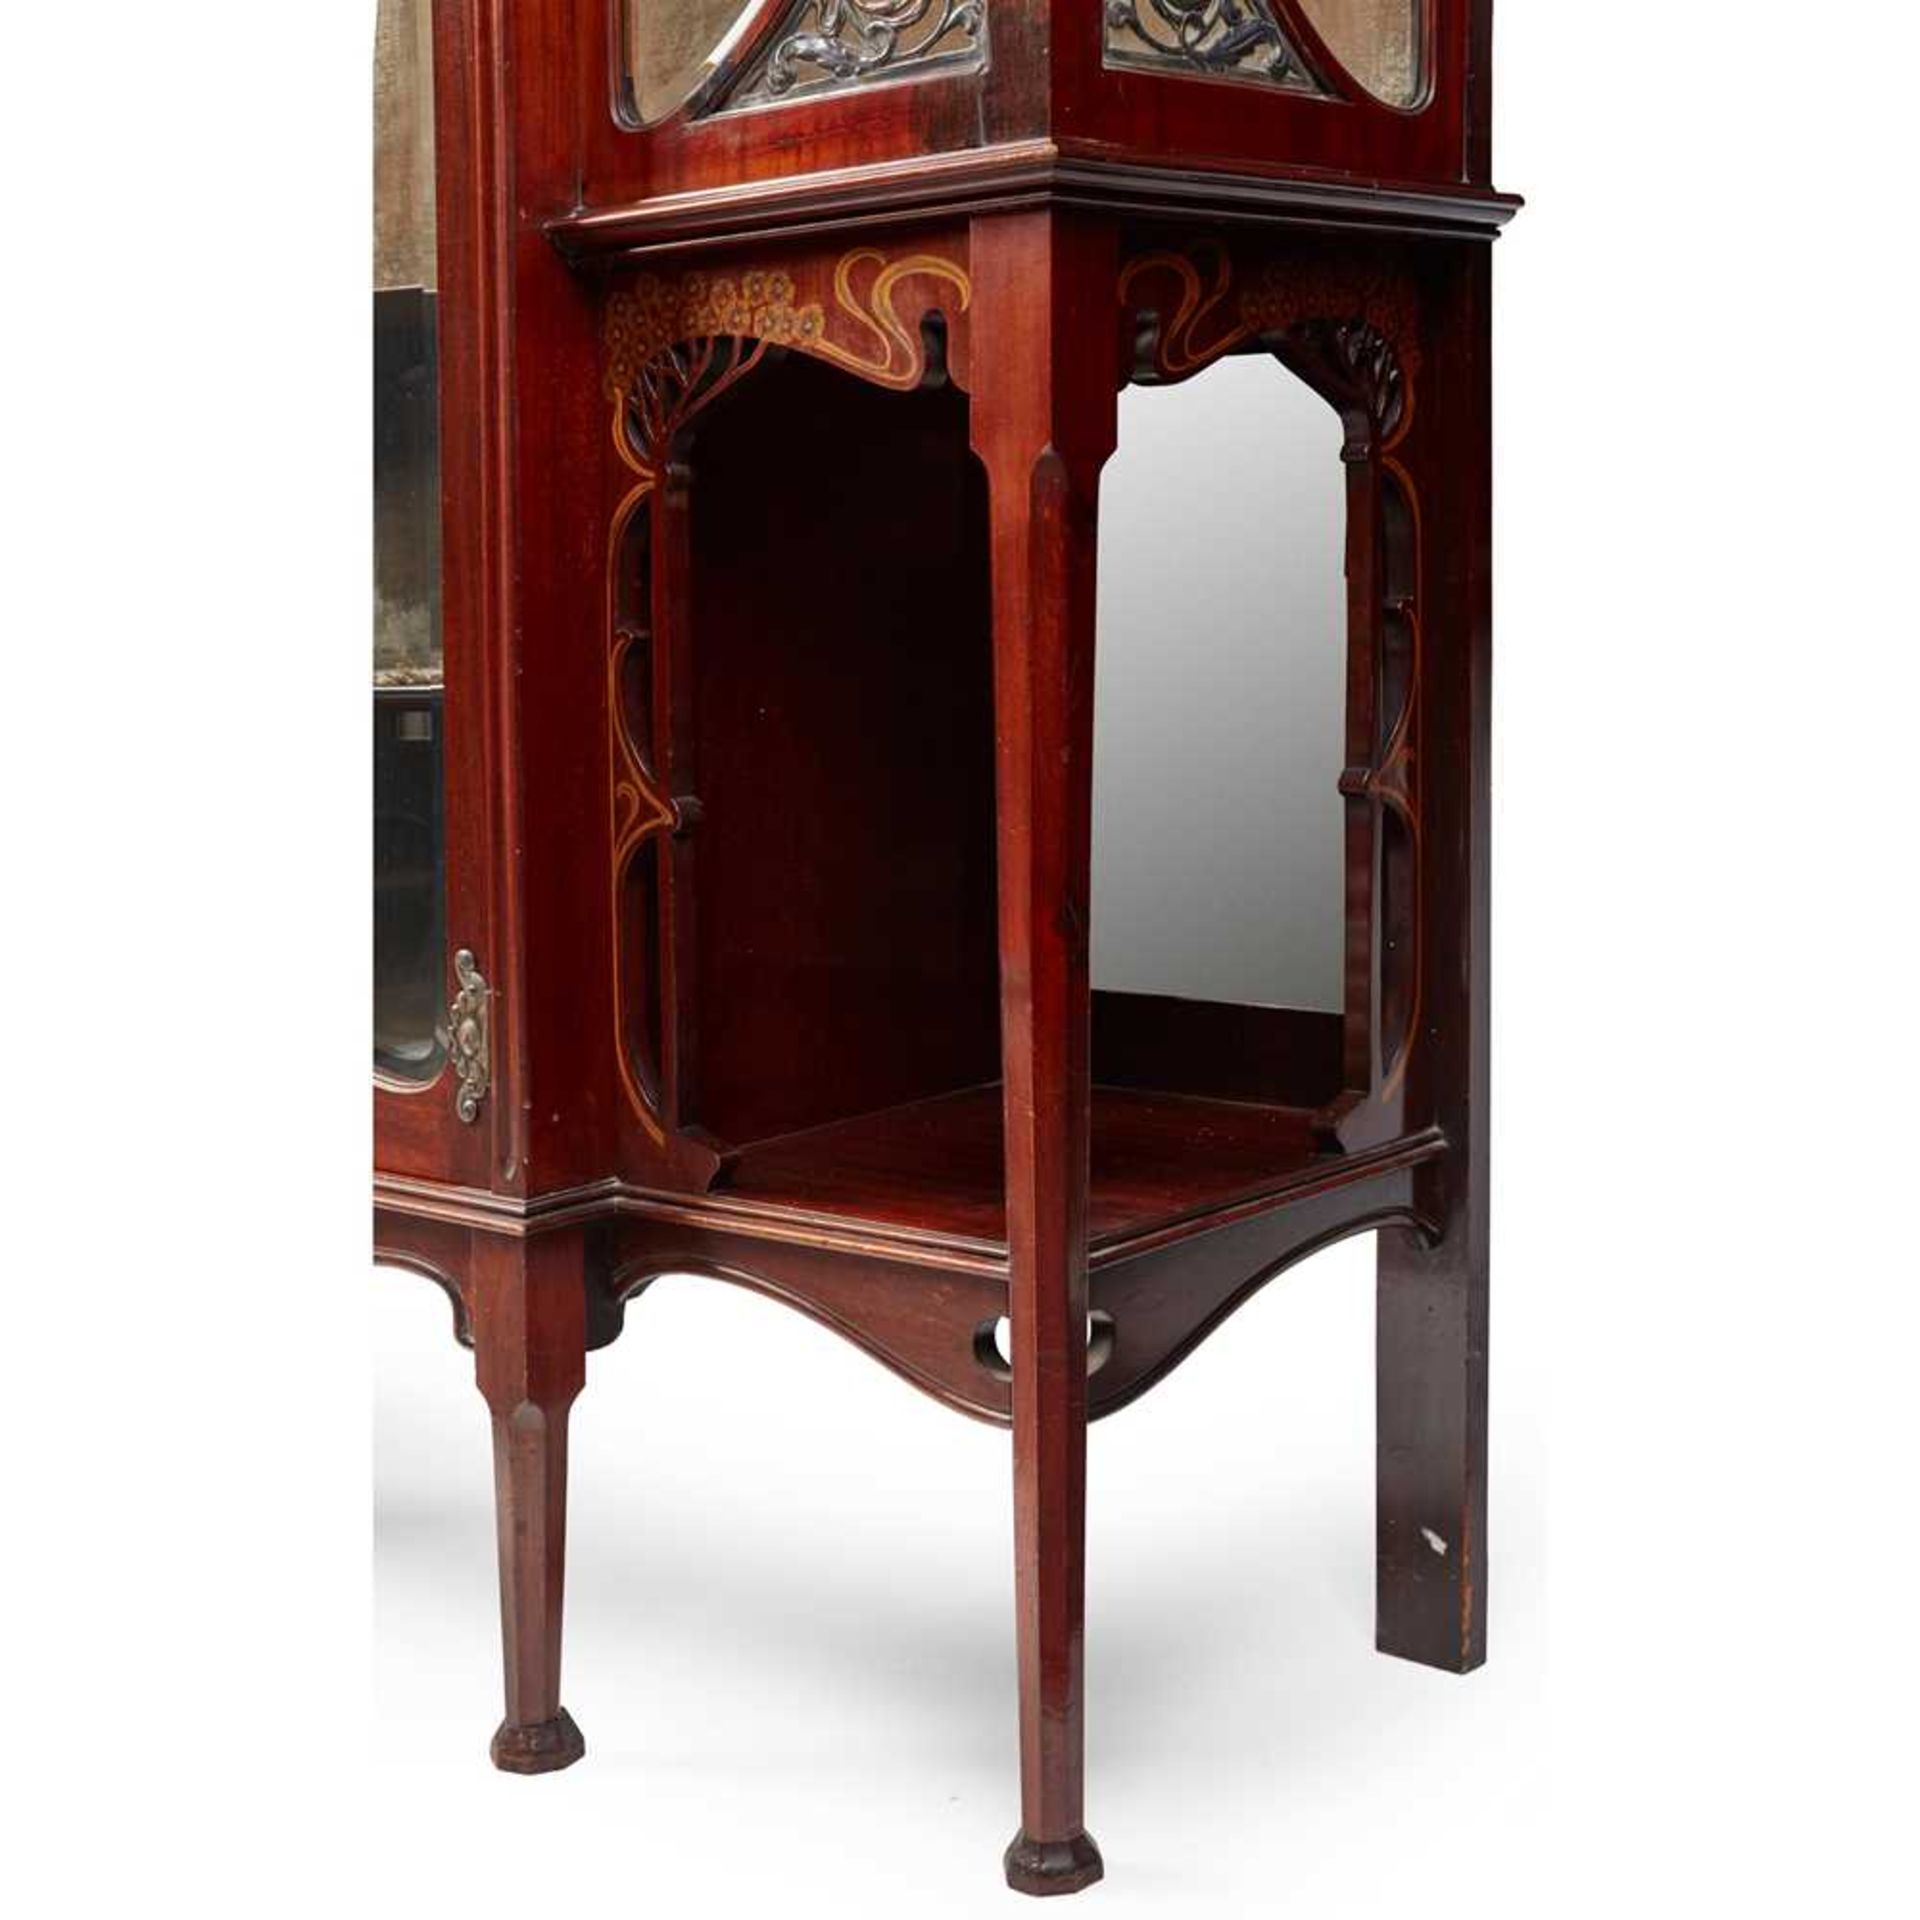 CHRISTOPHER PRATT AND SONS, BRADFORD (ATTRIBUTED TO) DISPLAY CABINET, CIRCA 1910 - Image 3 of 5